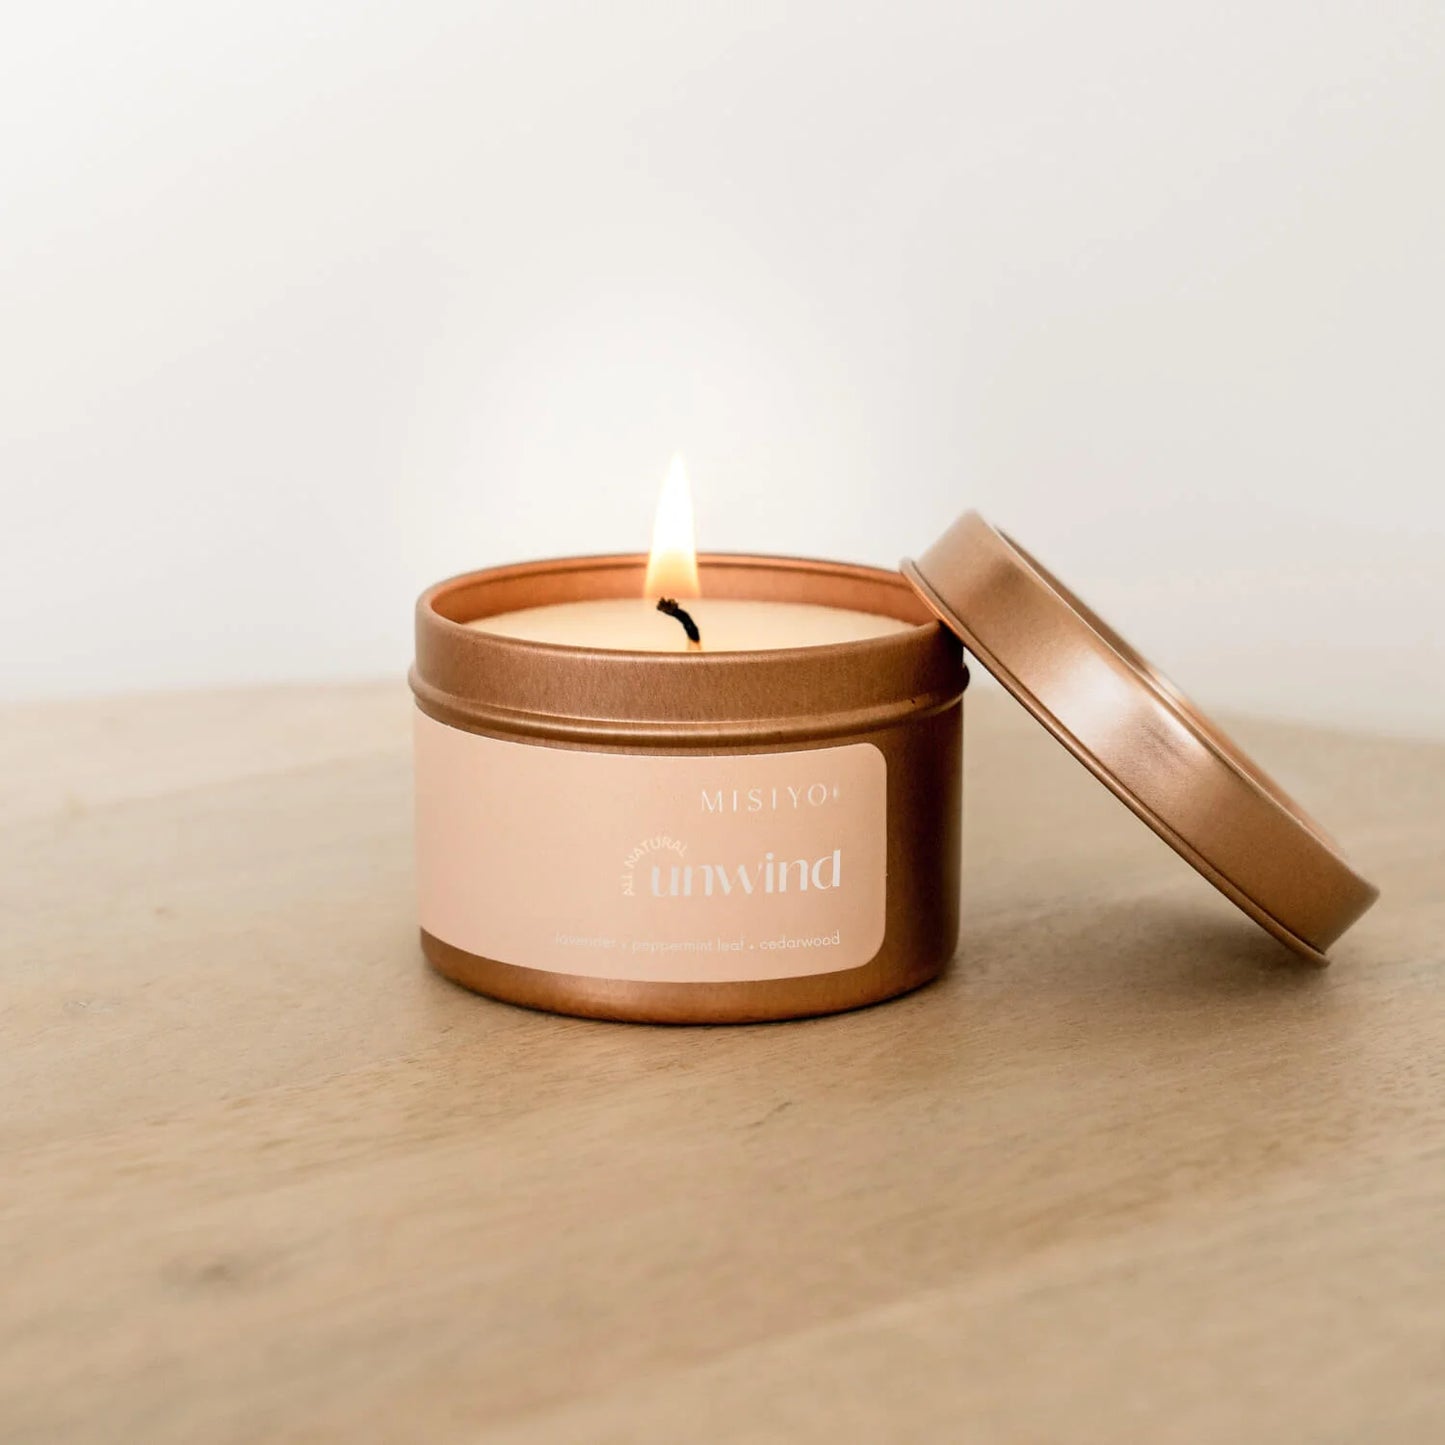 Unwind | All natural Candle